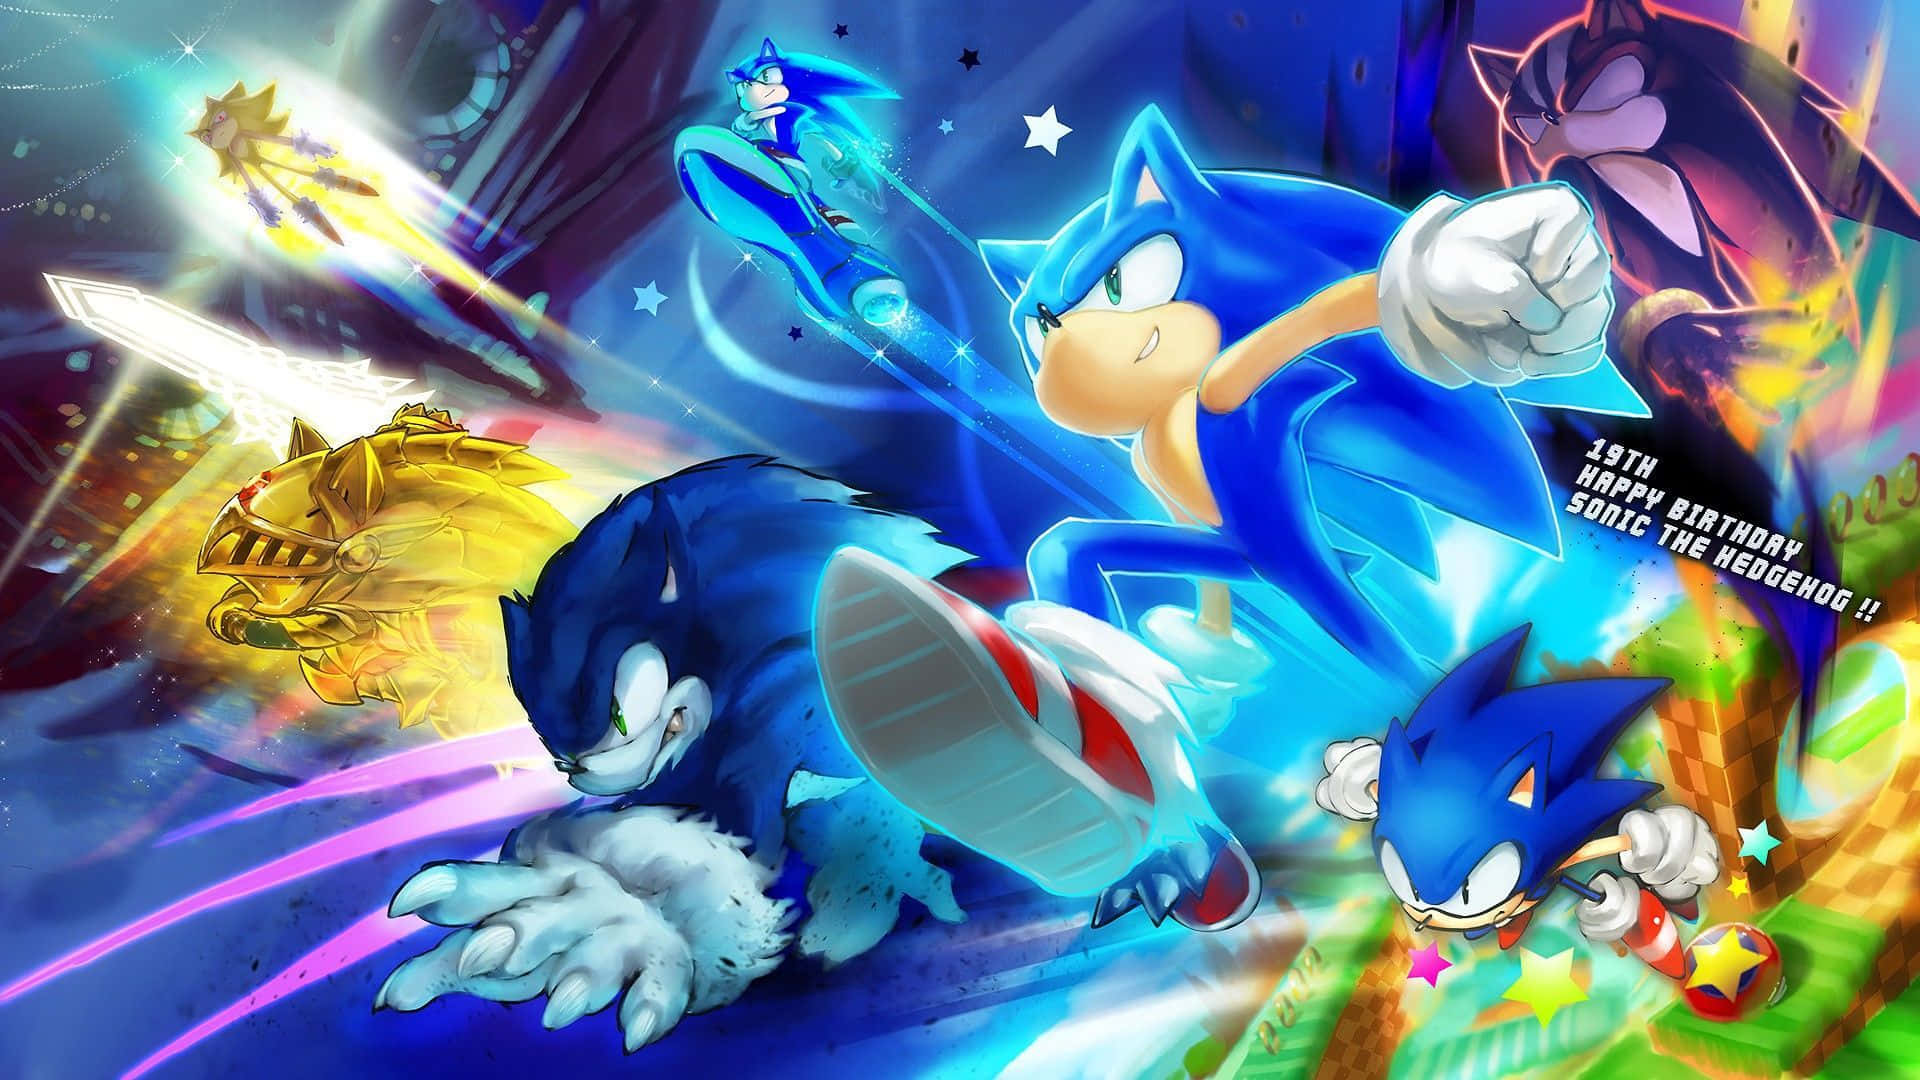 Sonic and Tails (TM) together in Sonic 2 HD Wallpaper